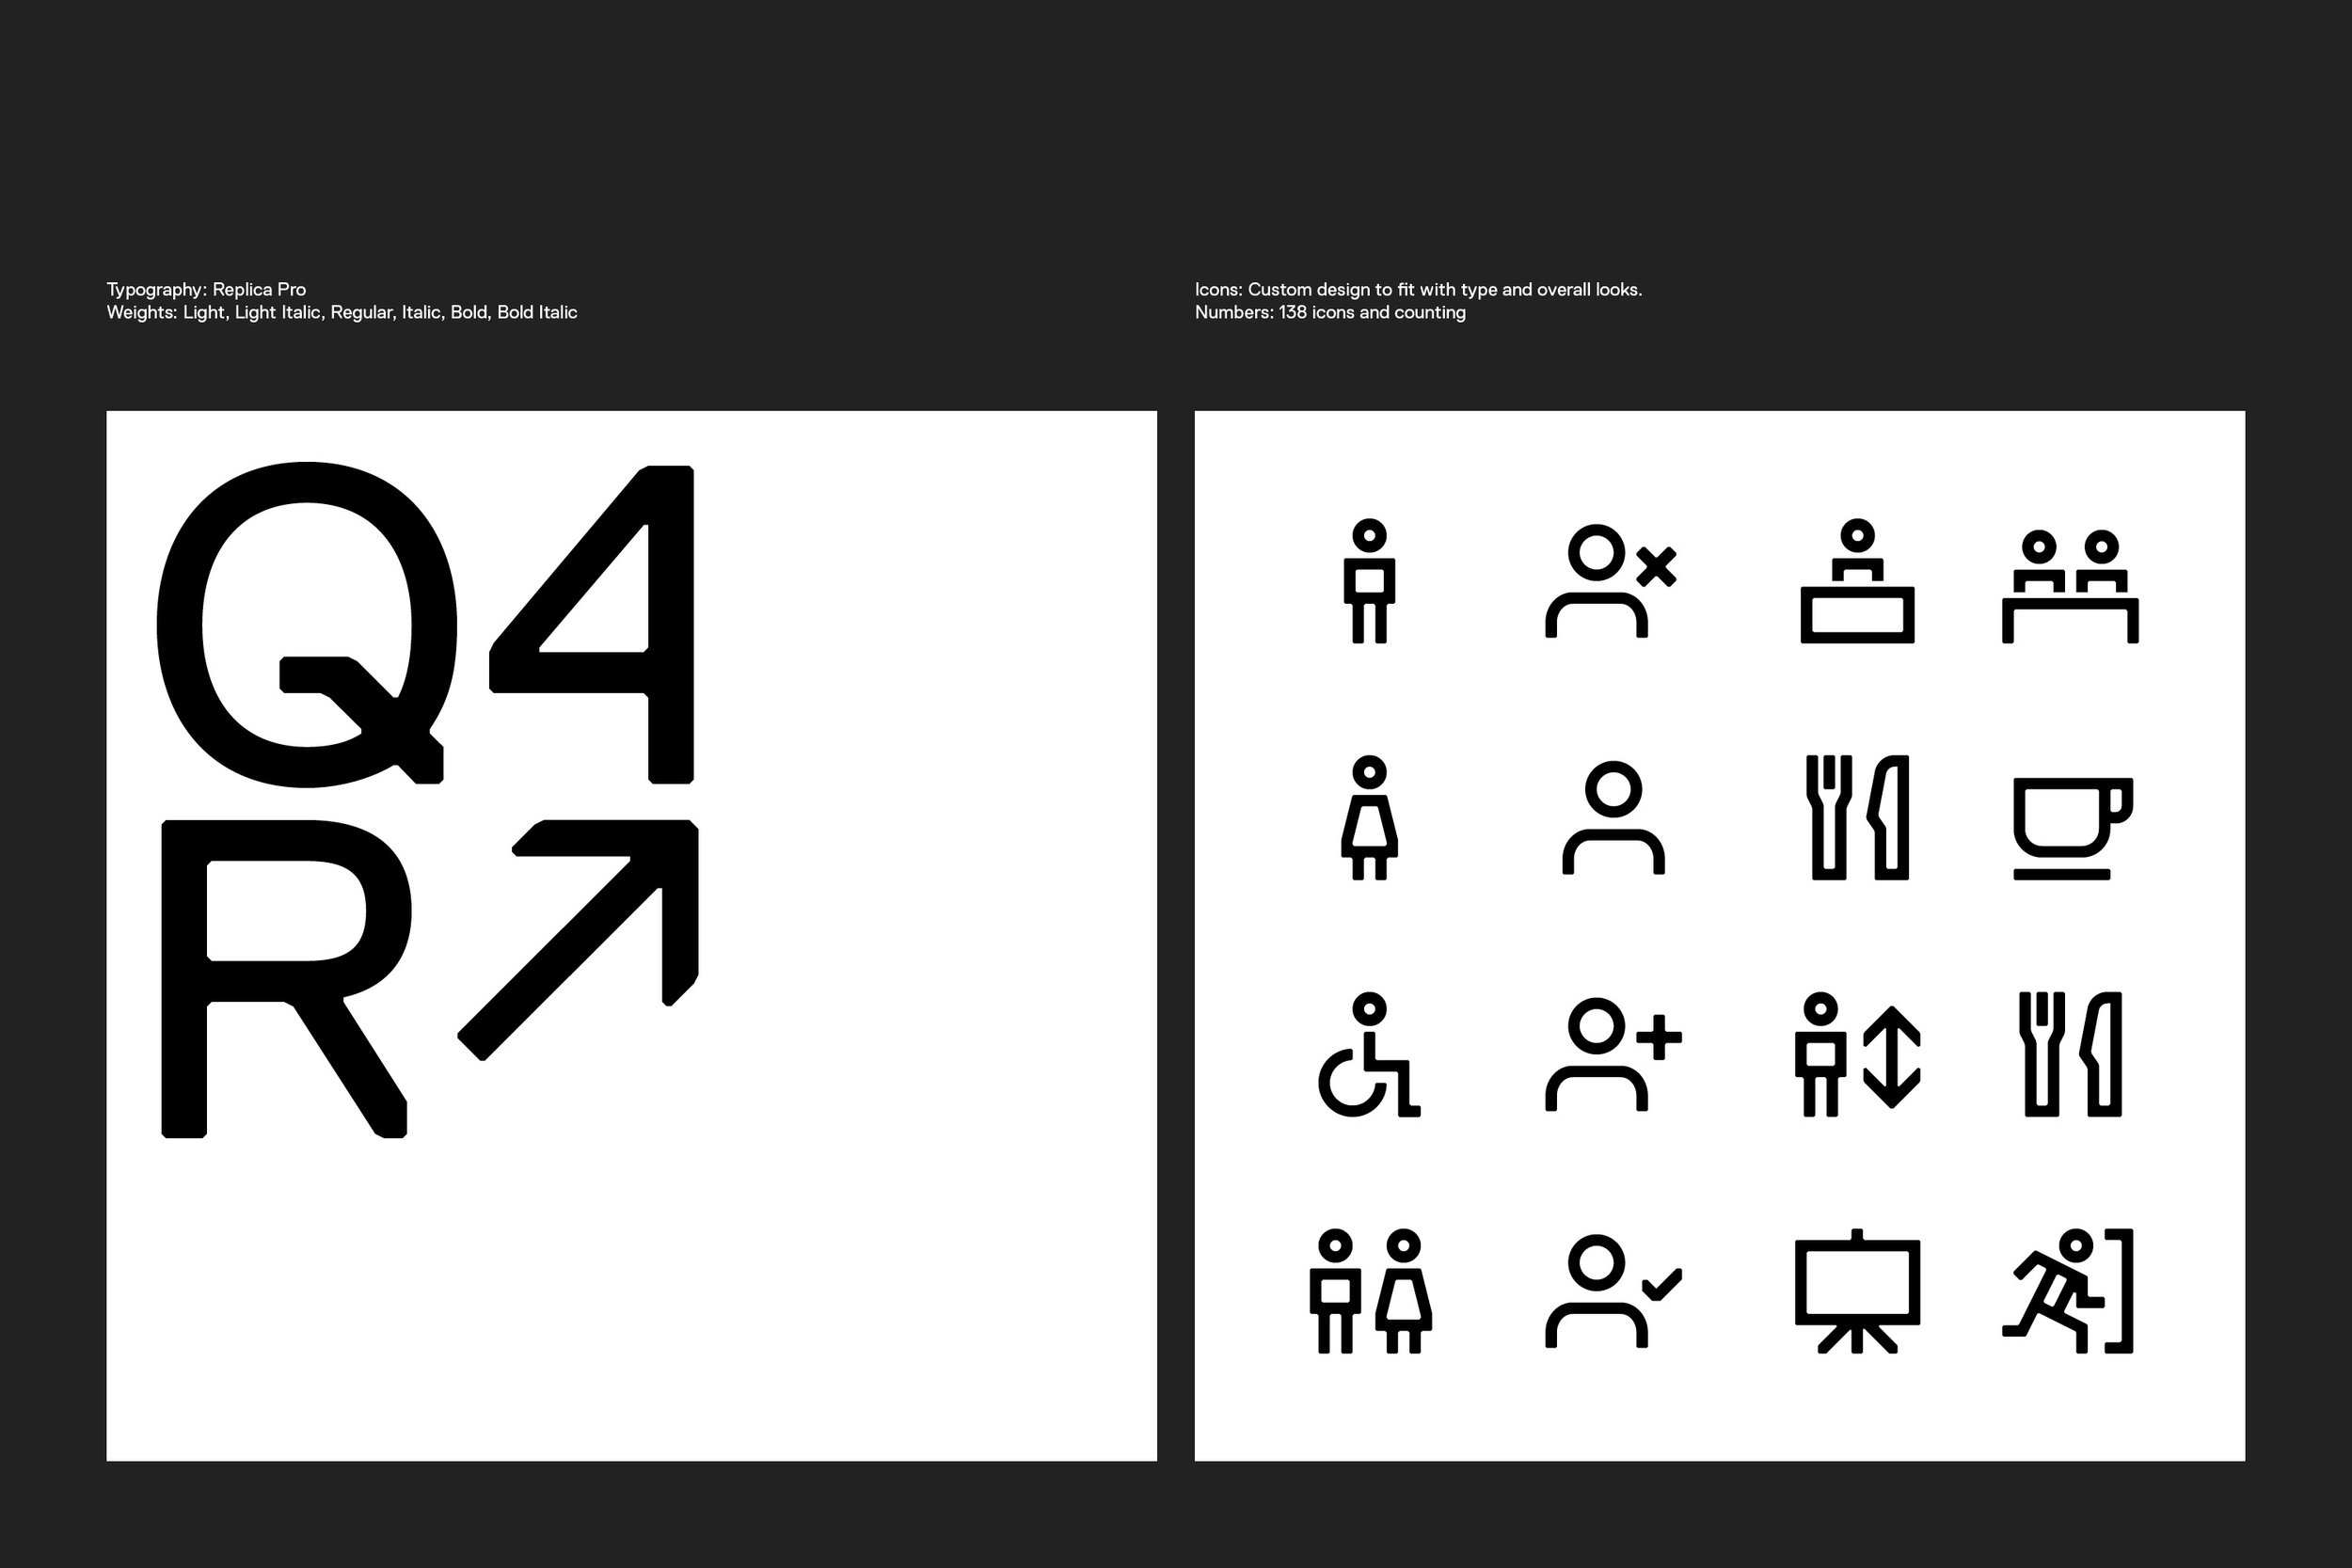 Typography and icons from Sporveien's visual identity